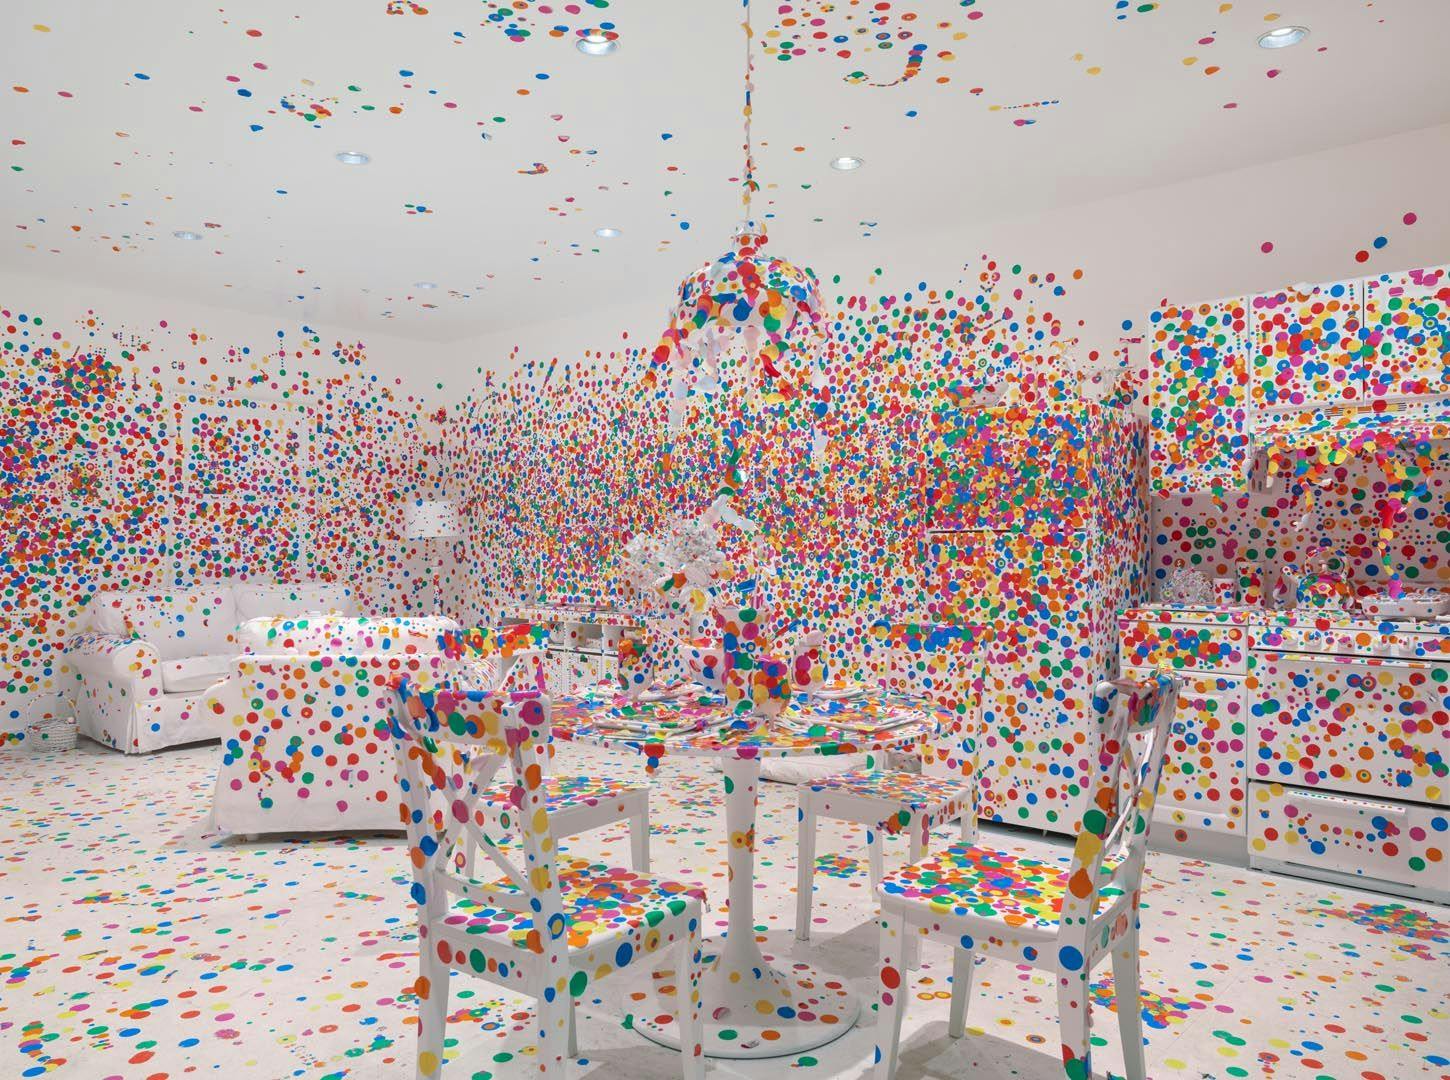 Installation view of the exhibition Yayoi Kusama: Give Me Love at David Zwirner in New York, dated 2015.